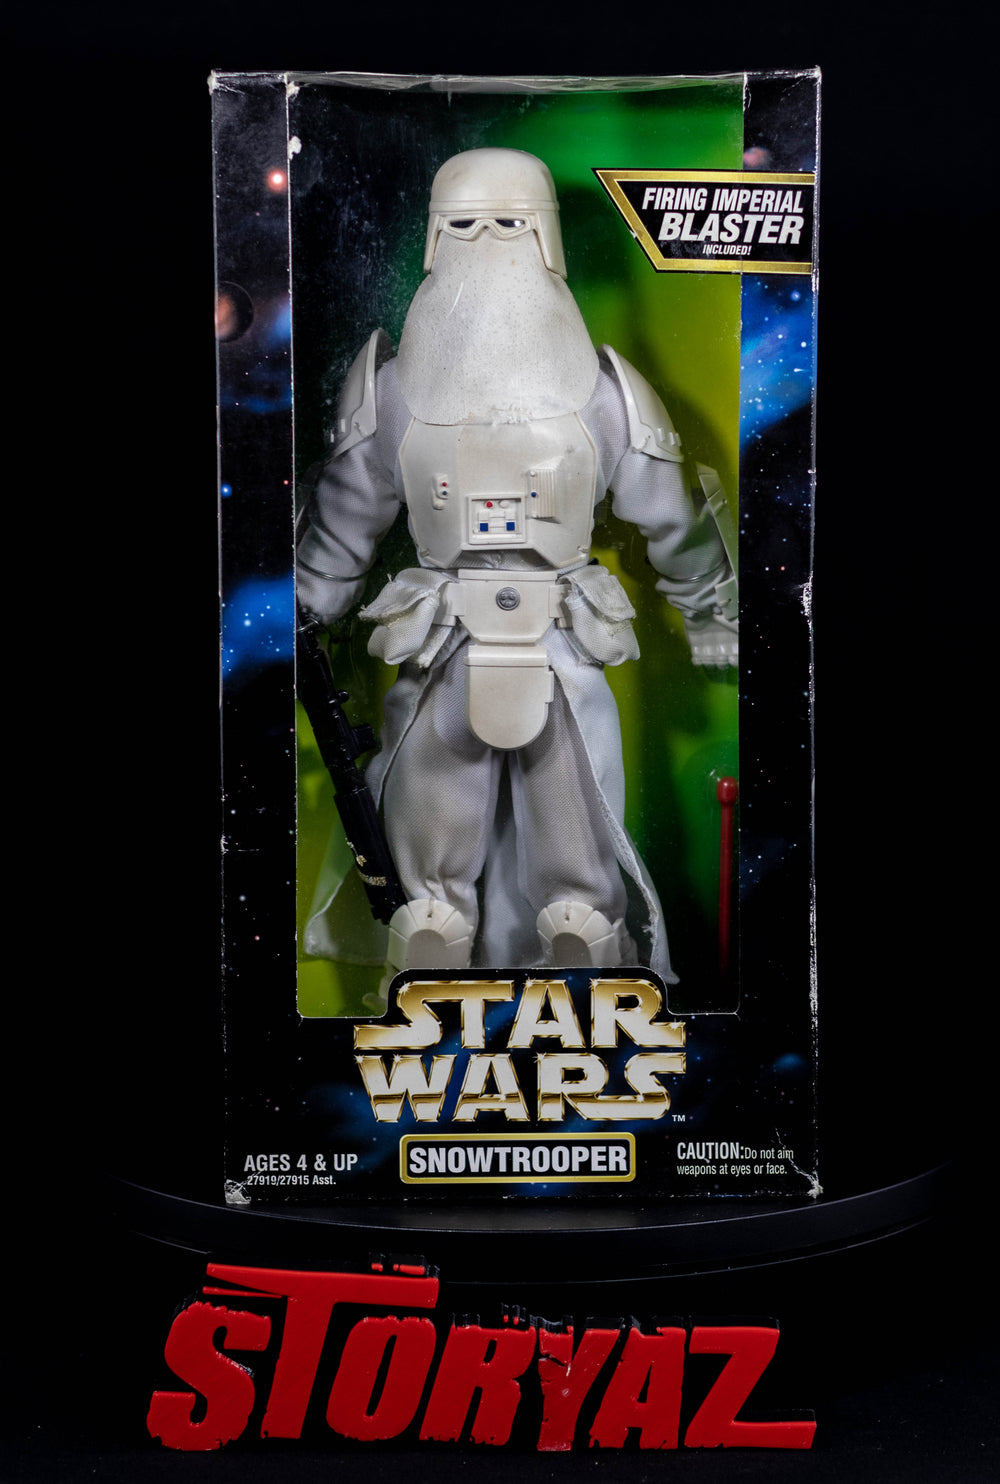 Star Wars: "Snowtrooper" 12" With Firing Imperial Blaster